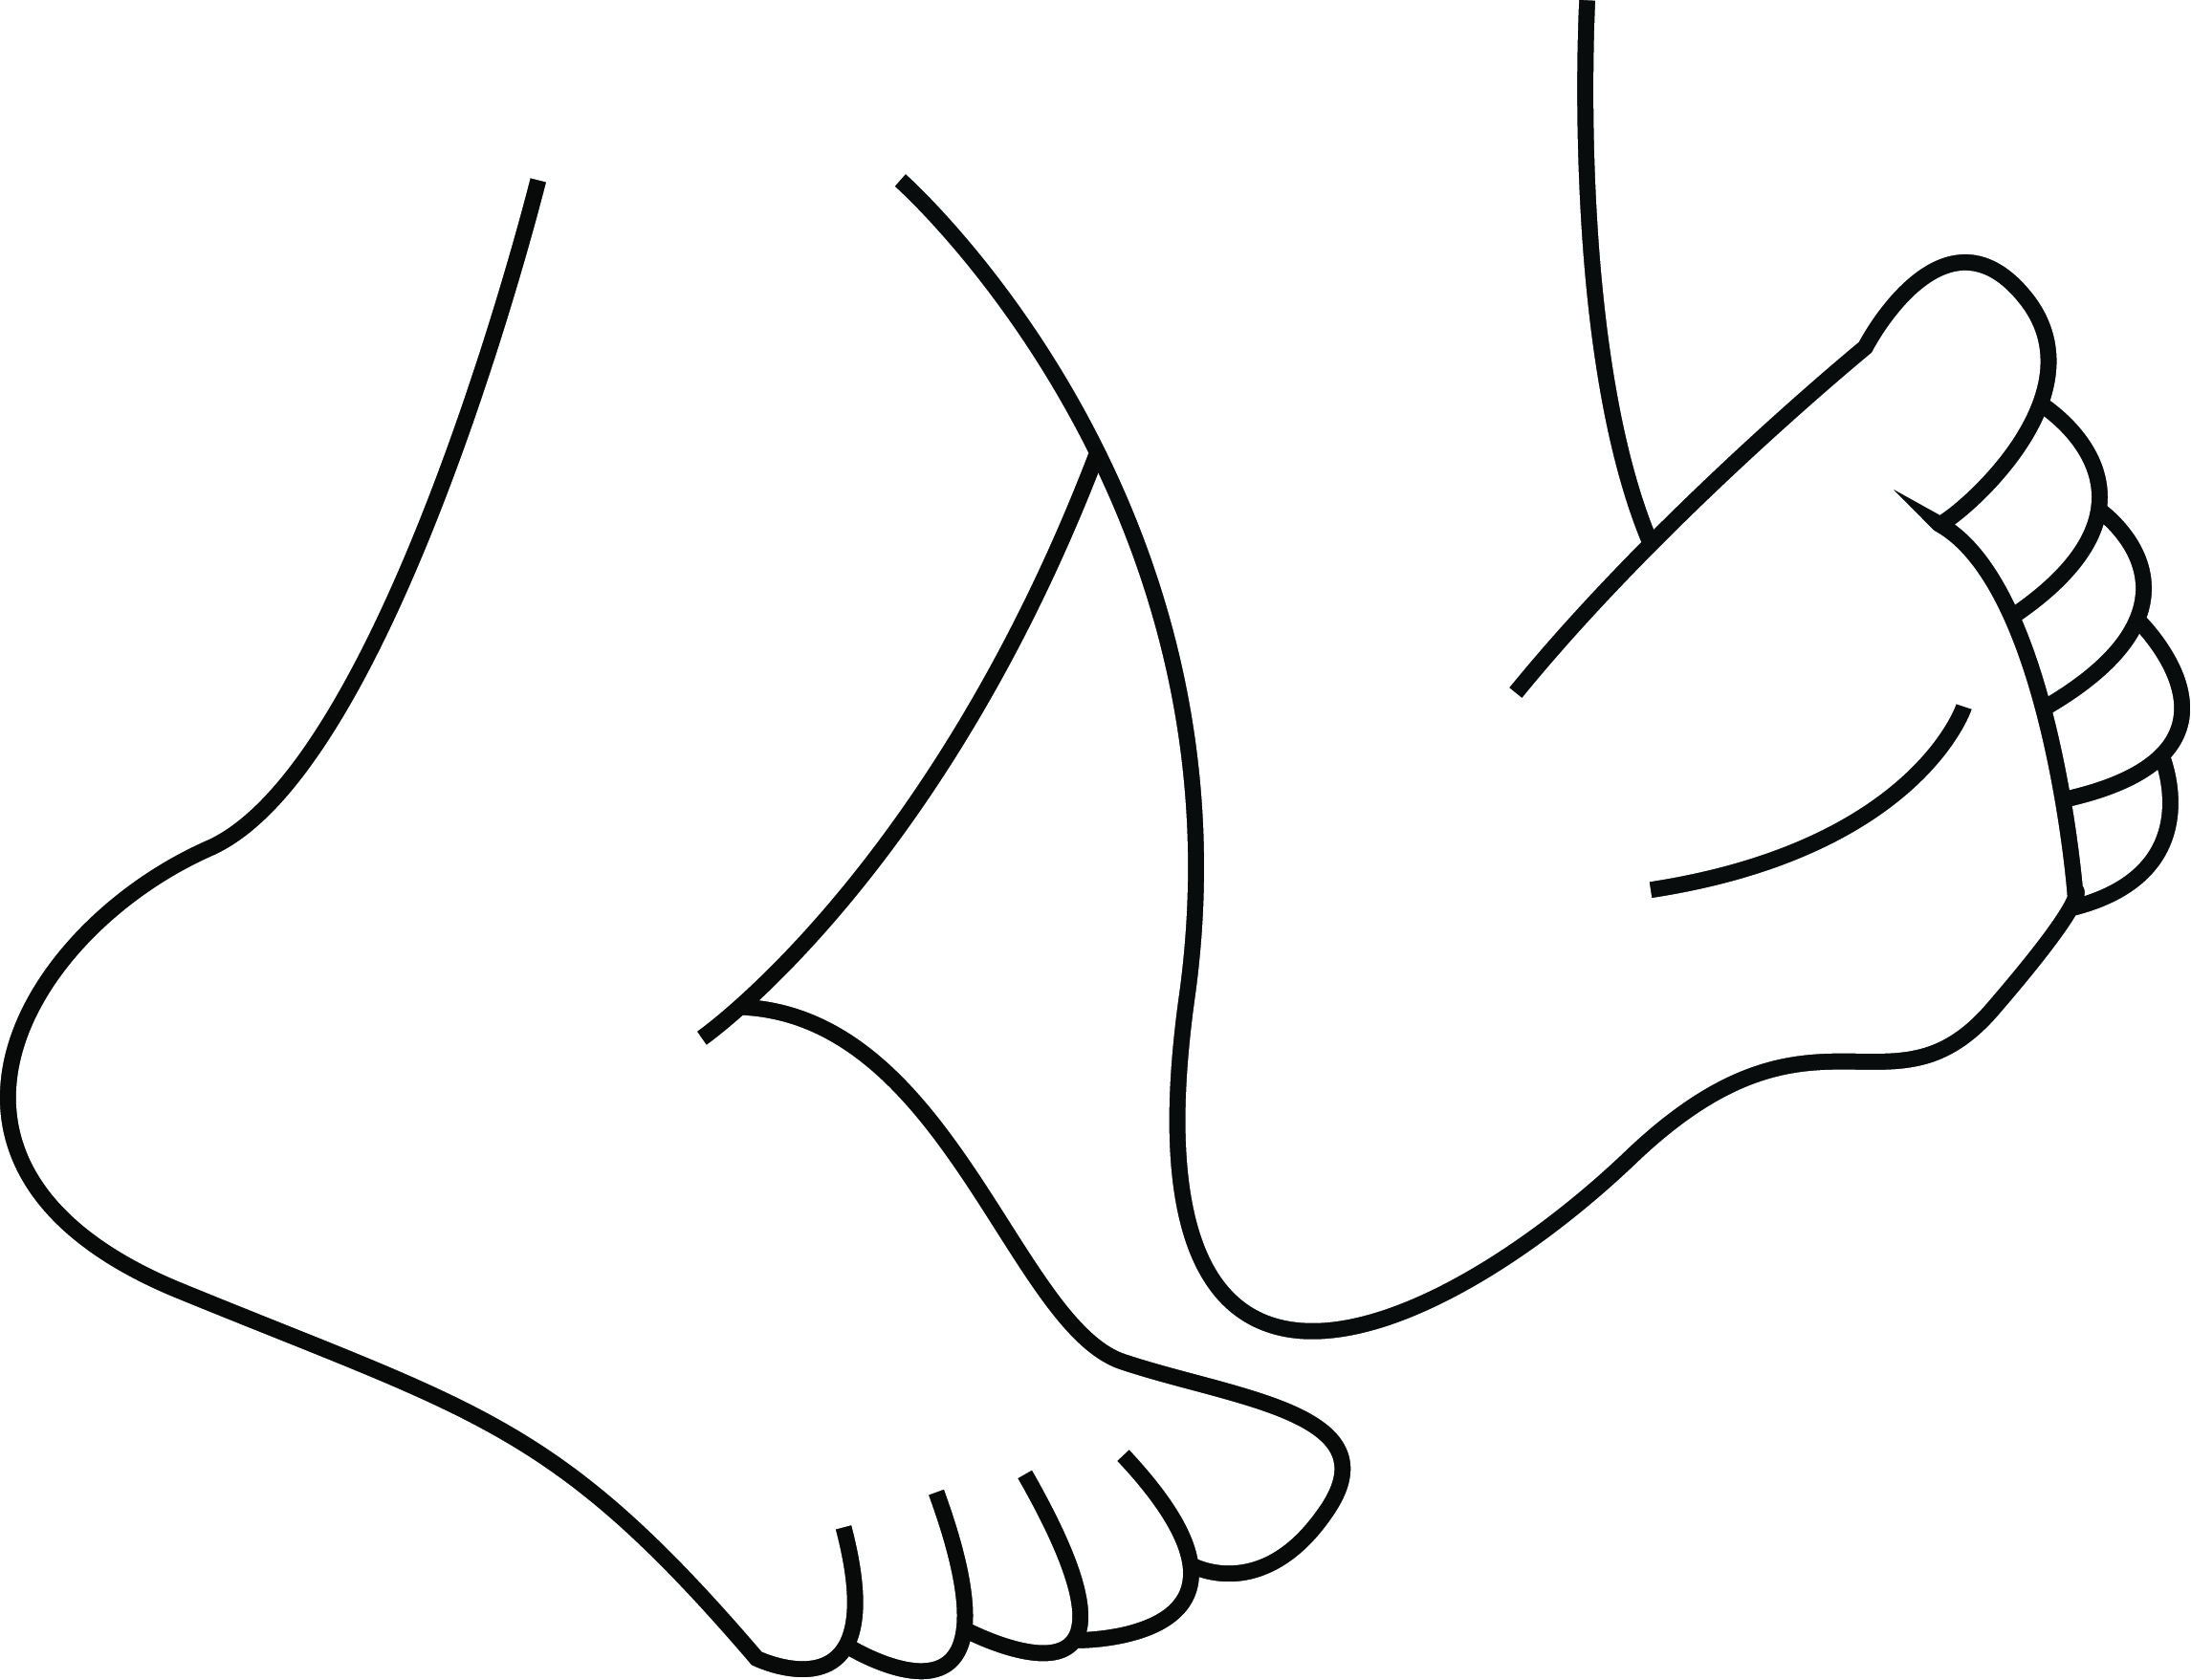 Free Feet Clipart Black And White, Download Free Feet Clipart Black And ...